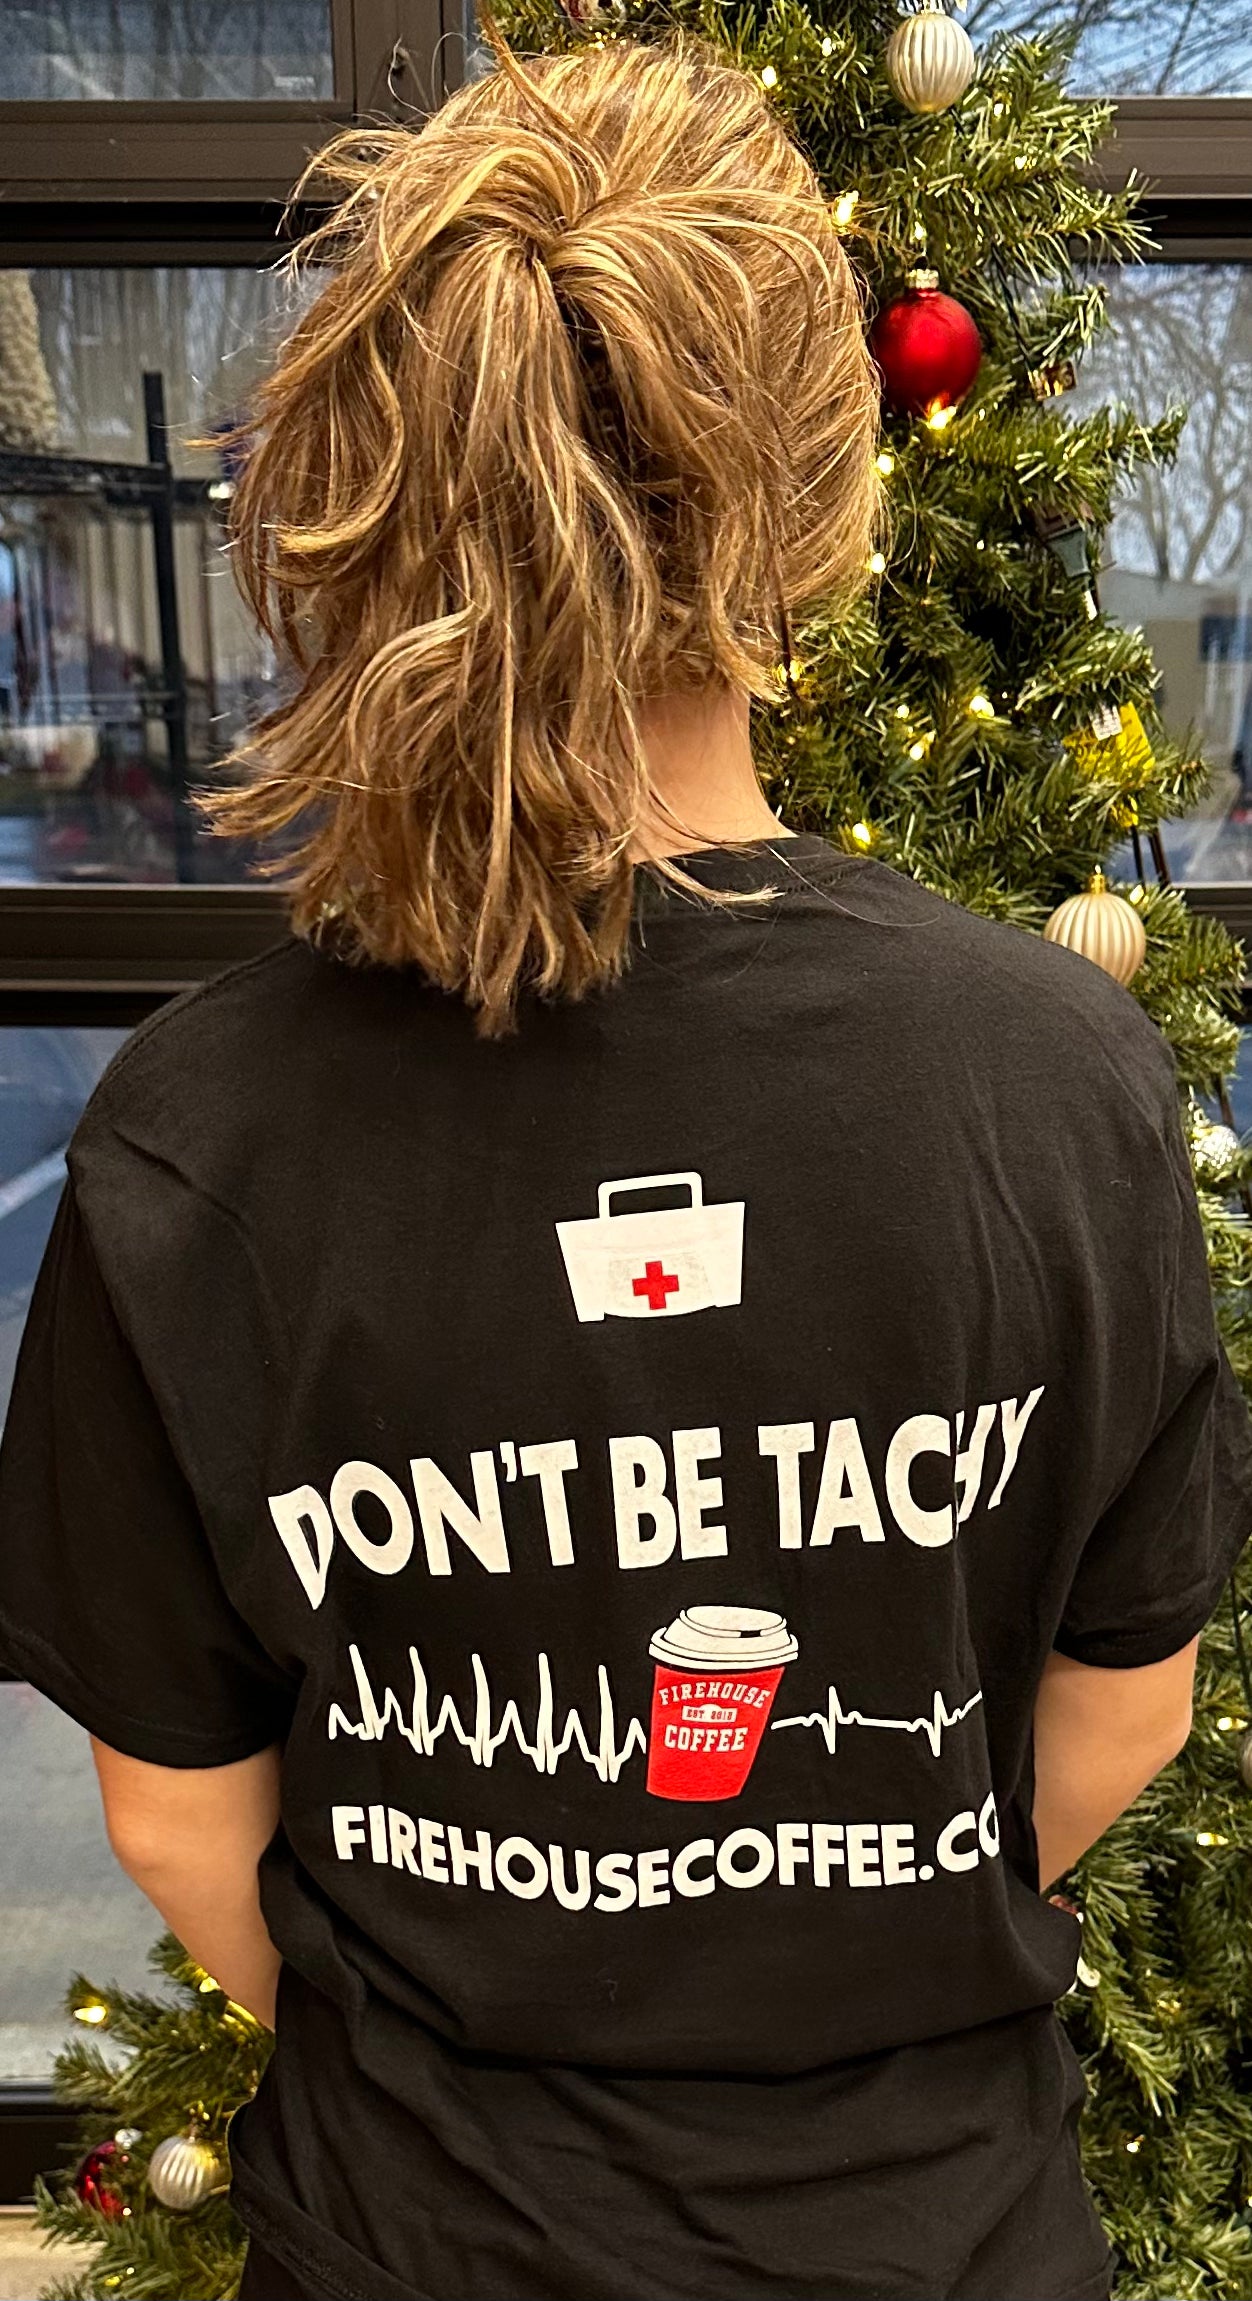 Don't be tachy!!!  Firehouse Coffee t shirt